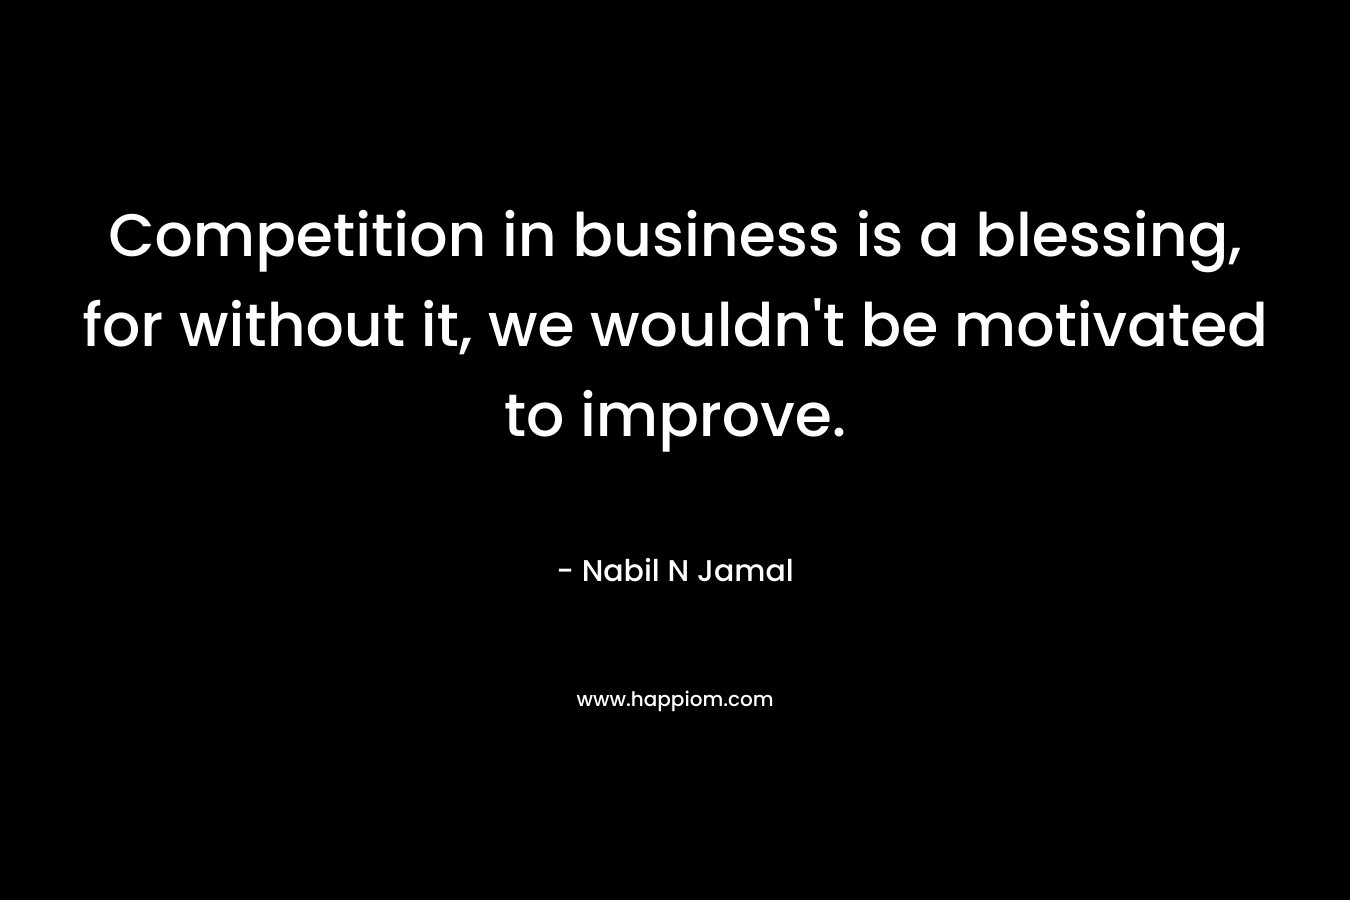 Competition in business is a blessing, for without it, we wouldn't be motivated to improve.